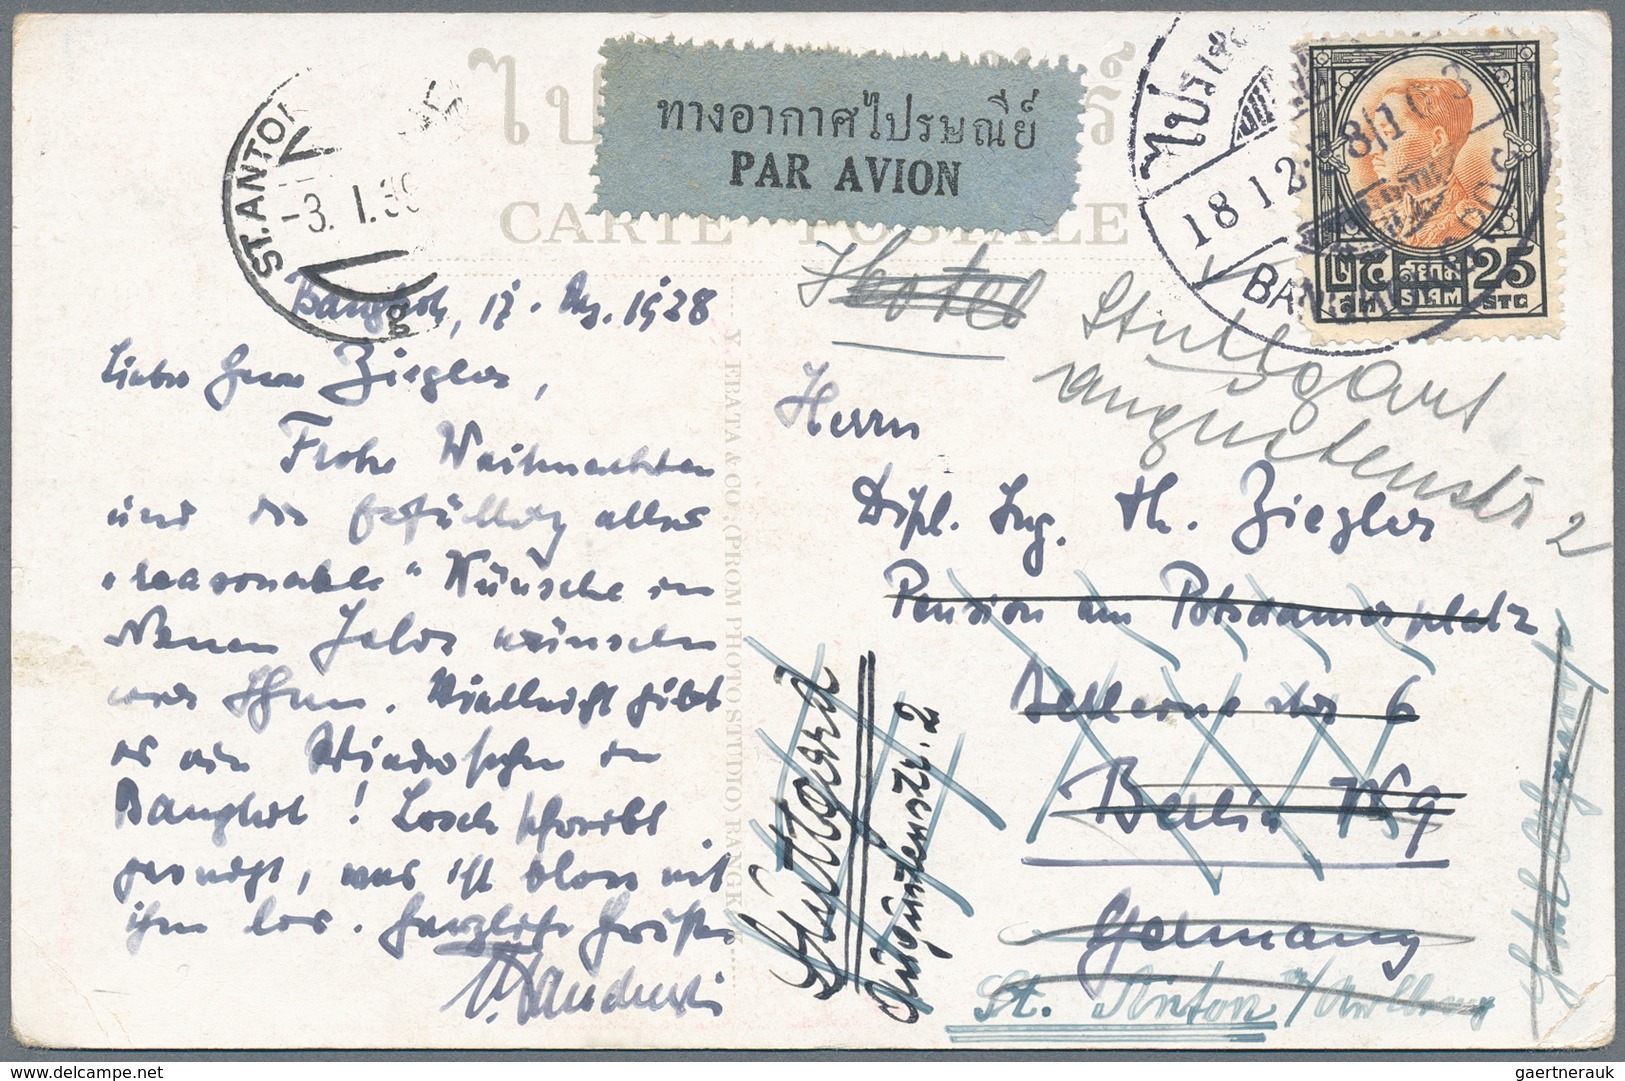 Thailand: 1908/62, Covers (16), Fronts (2) Or Used Ppc (9) And On Piece (1) Inc. 1925 Inland FFC, 19 - Thailand